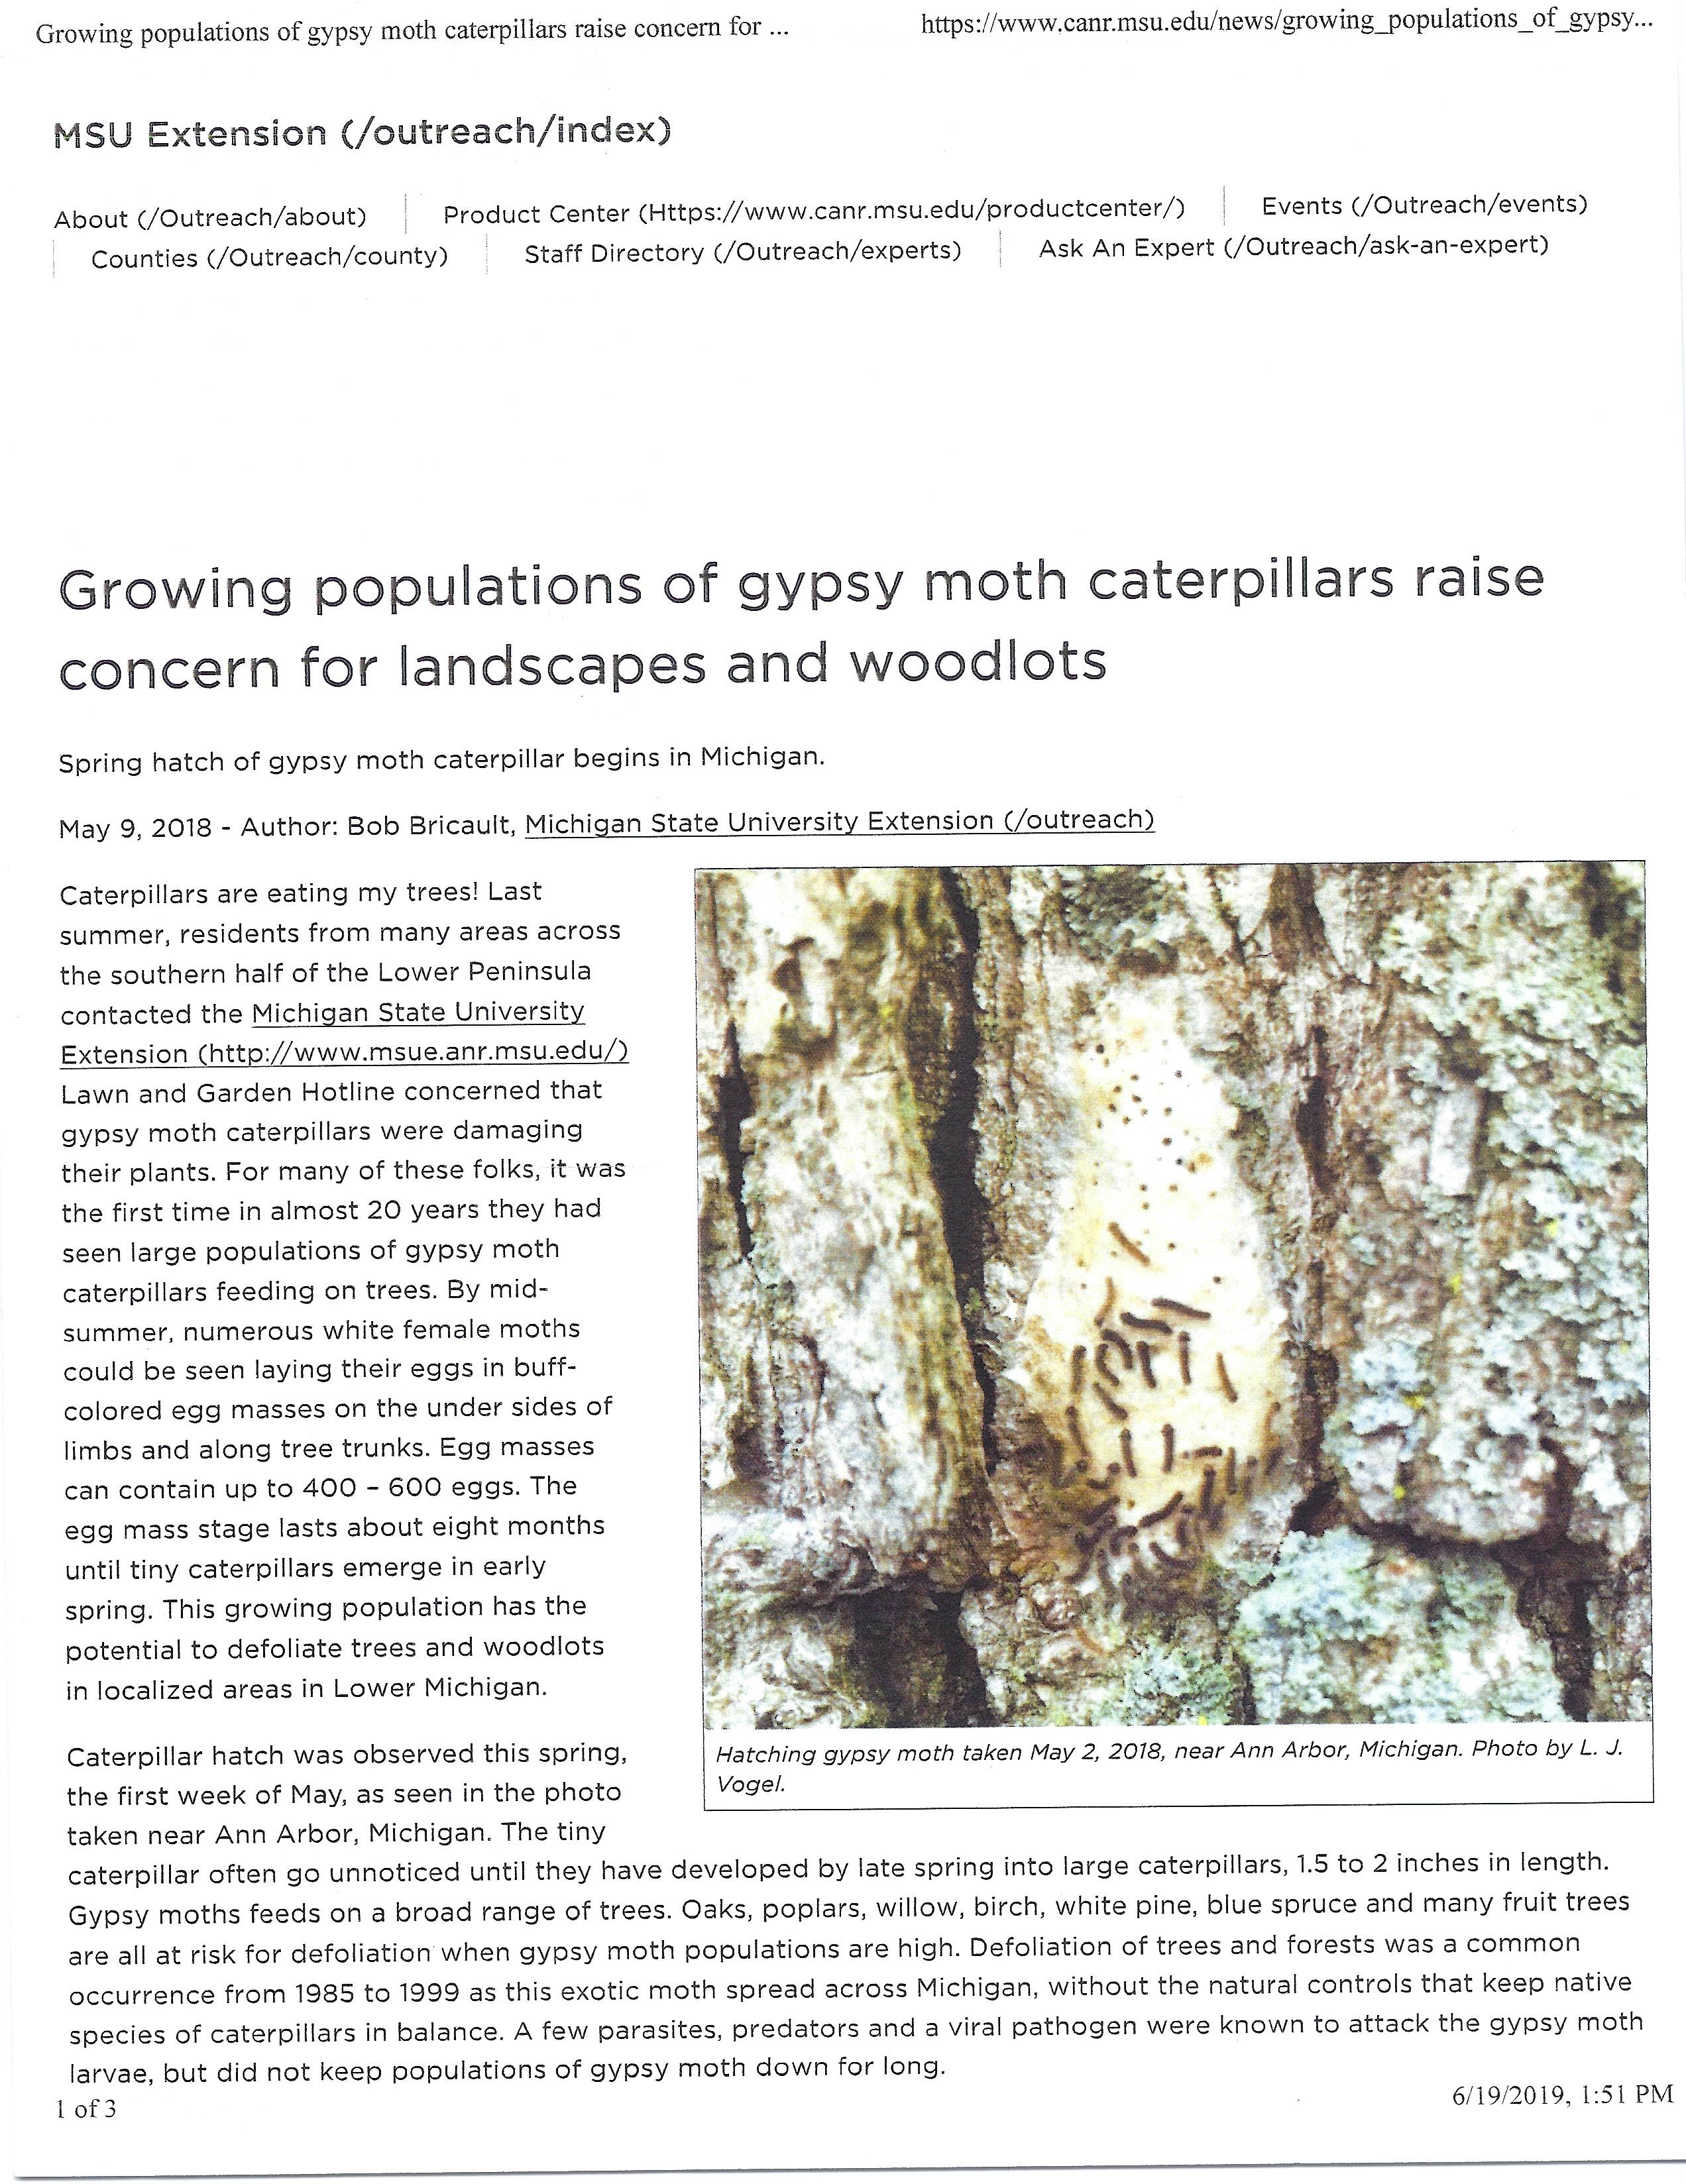 Info about controlling gypsy moth_Page_3